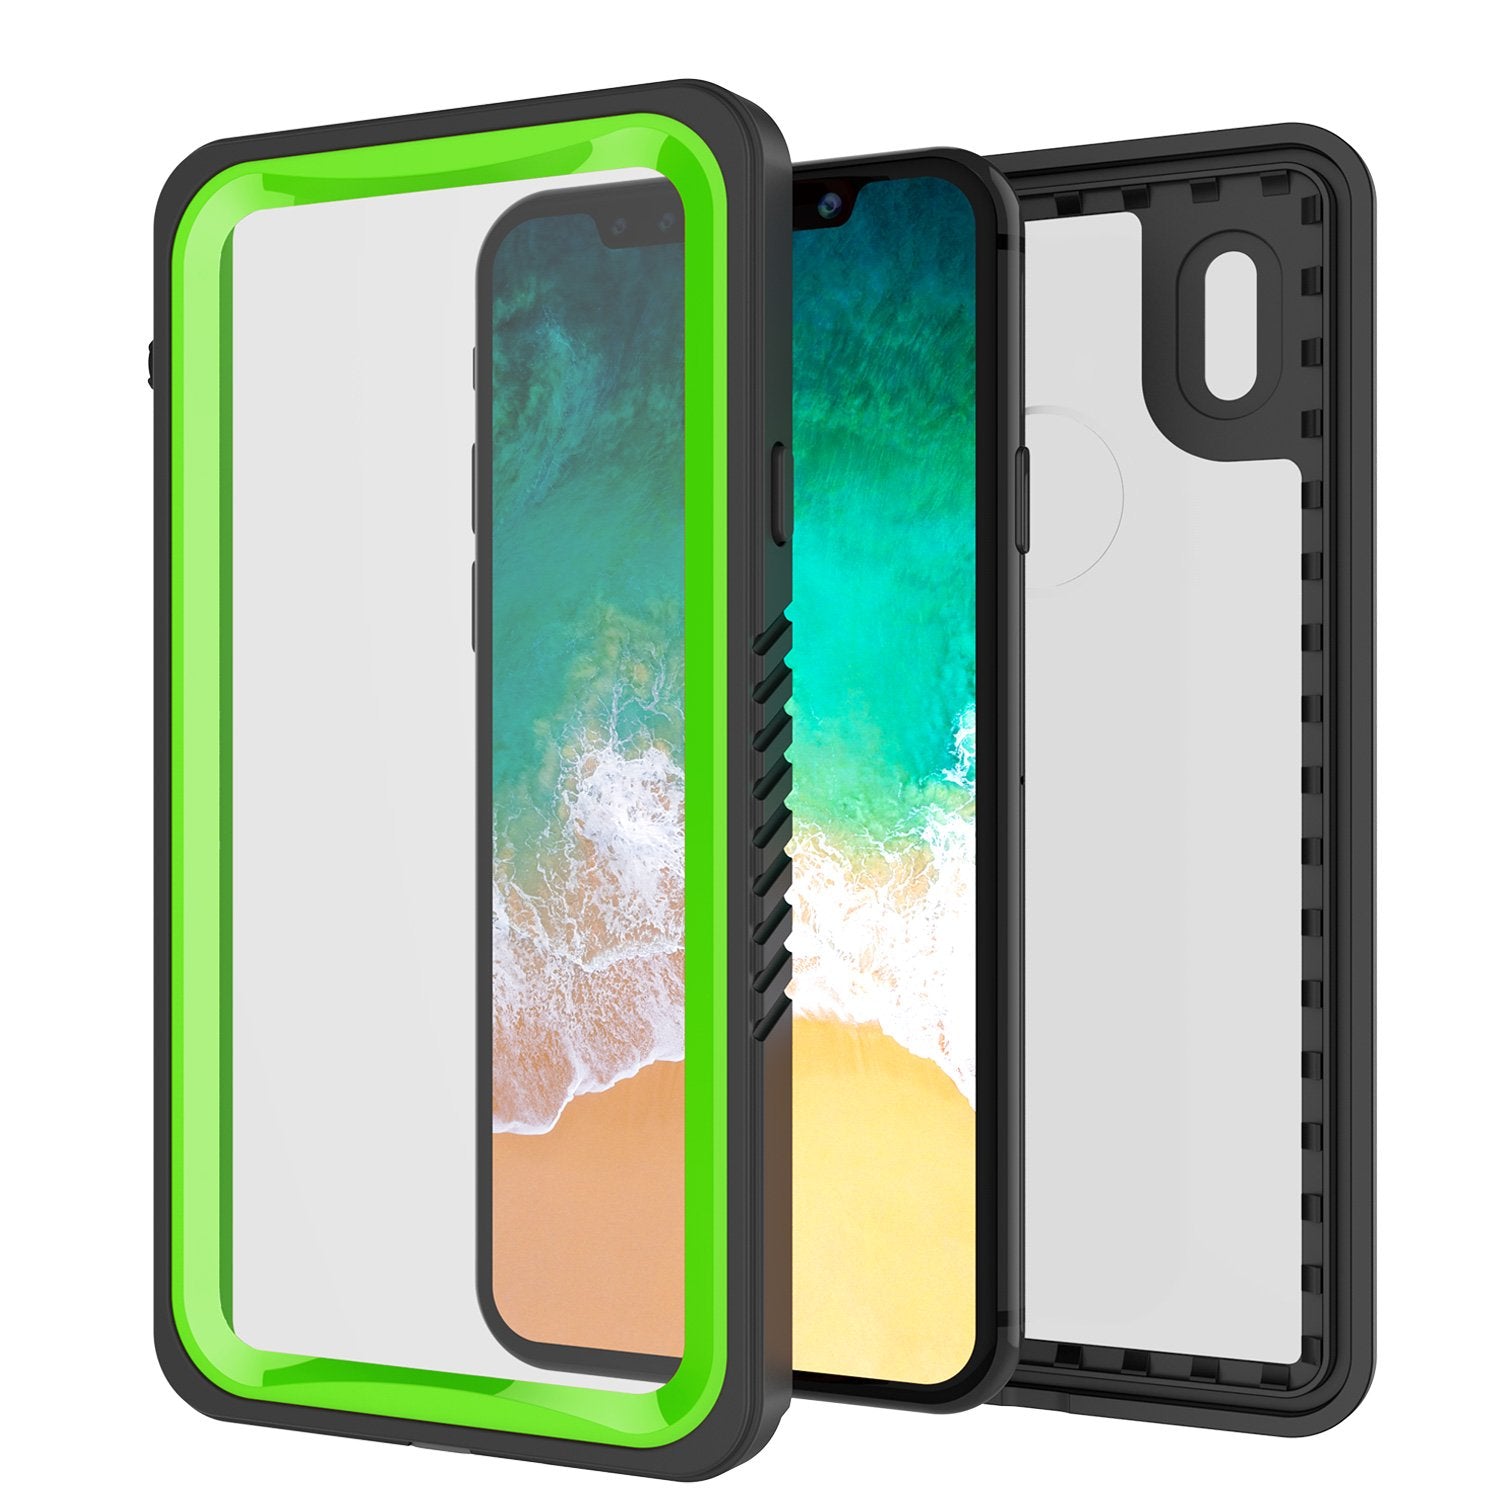 iPhone X Case, Punkcase [Extreme Series] [Slim Fit] [IP68 Certified] [Shockproof] [Snowproof] [Dirproof] Armor Cover W/ Built In Screen Protector for Apple iPhone 10 [LIGHT GREEN]